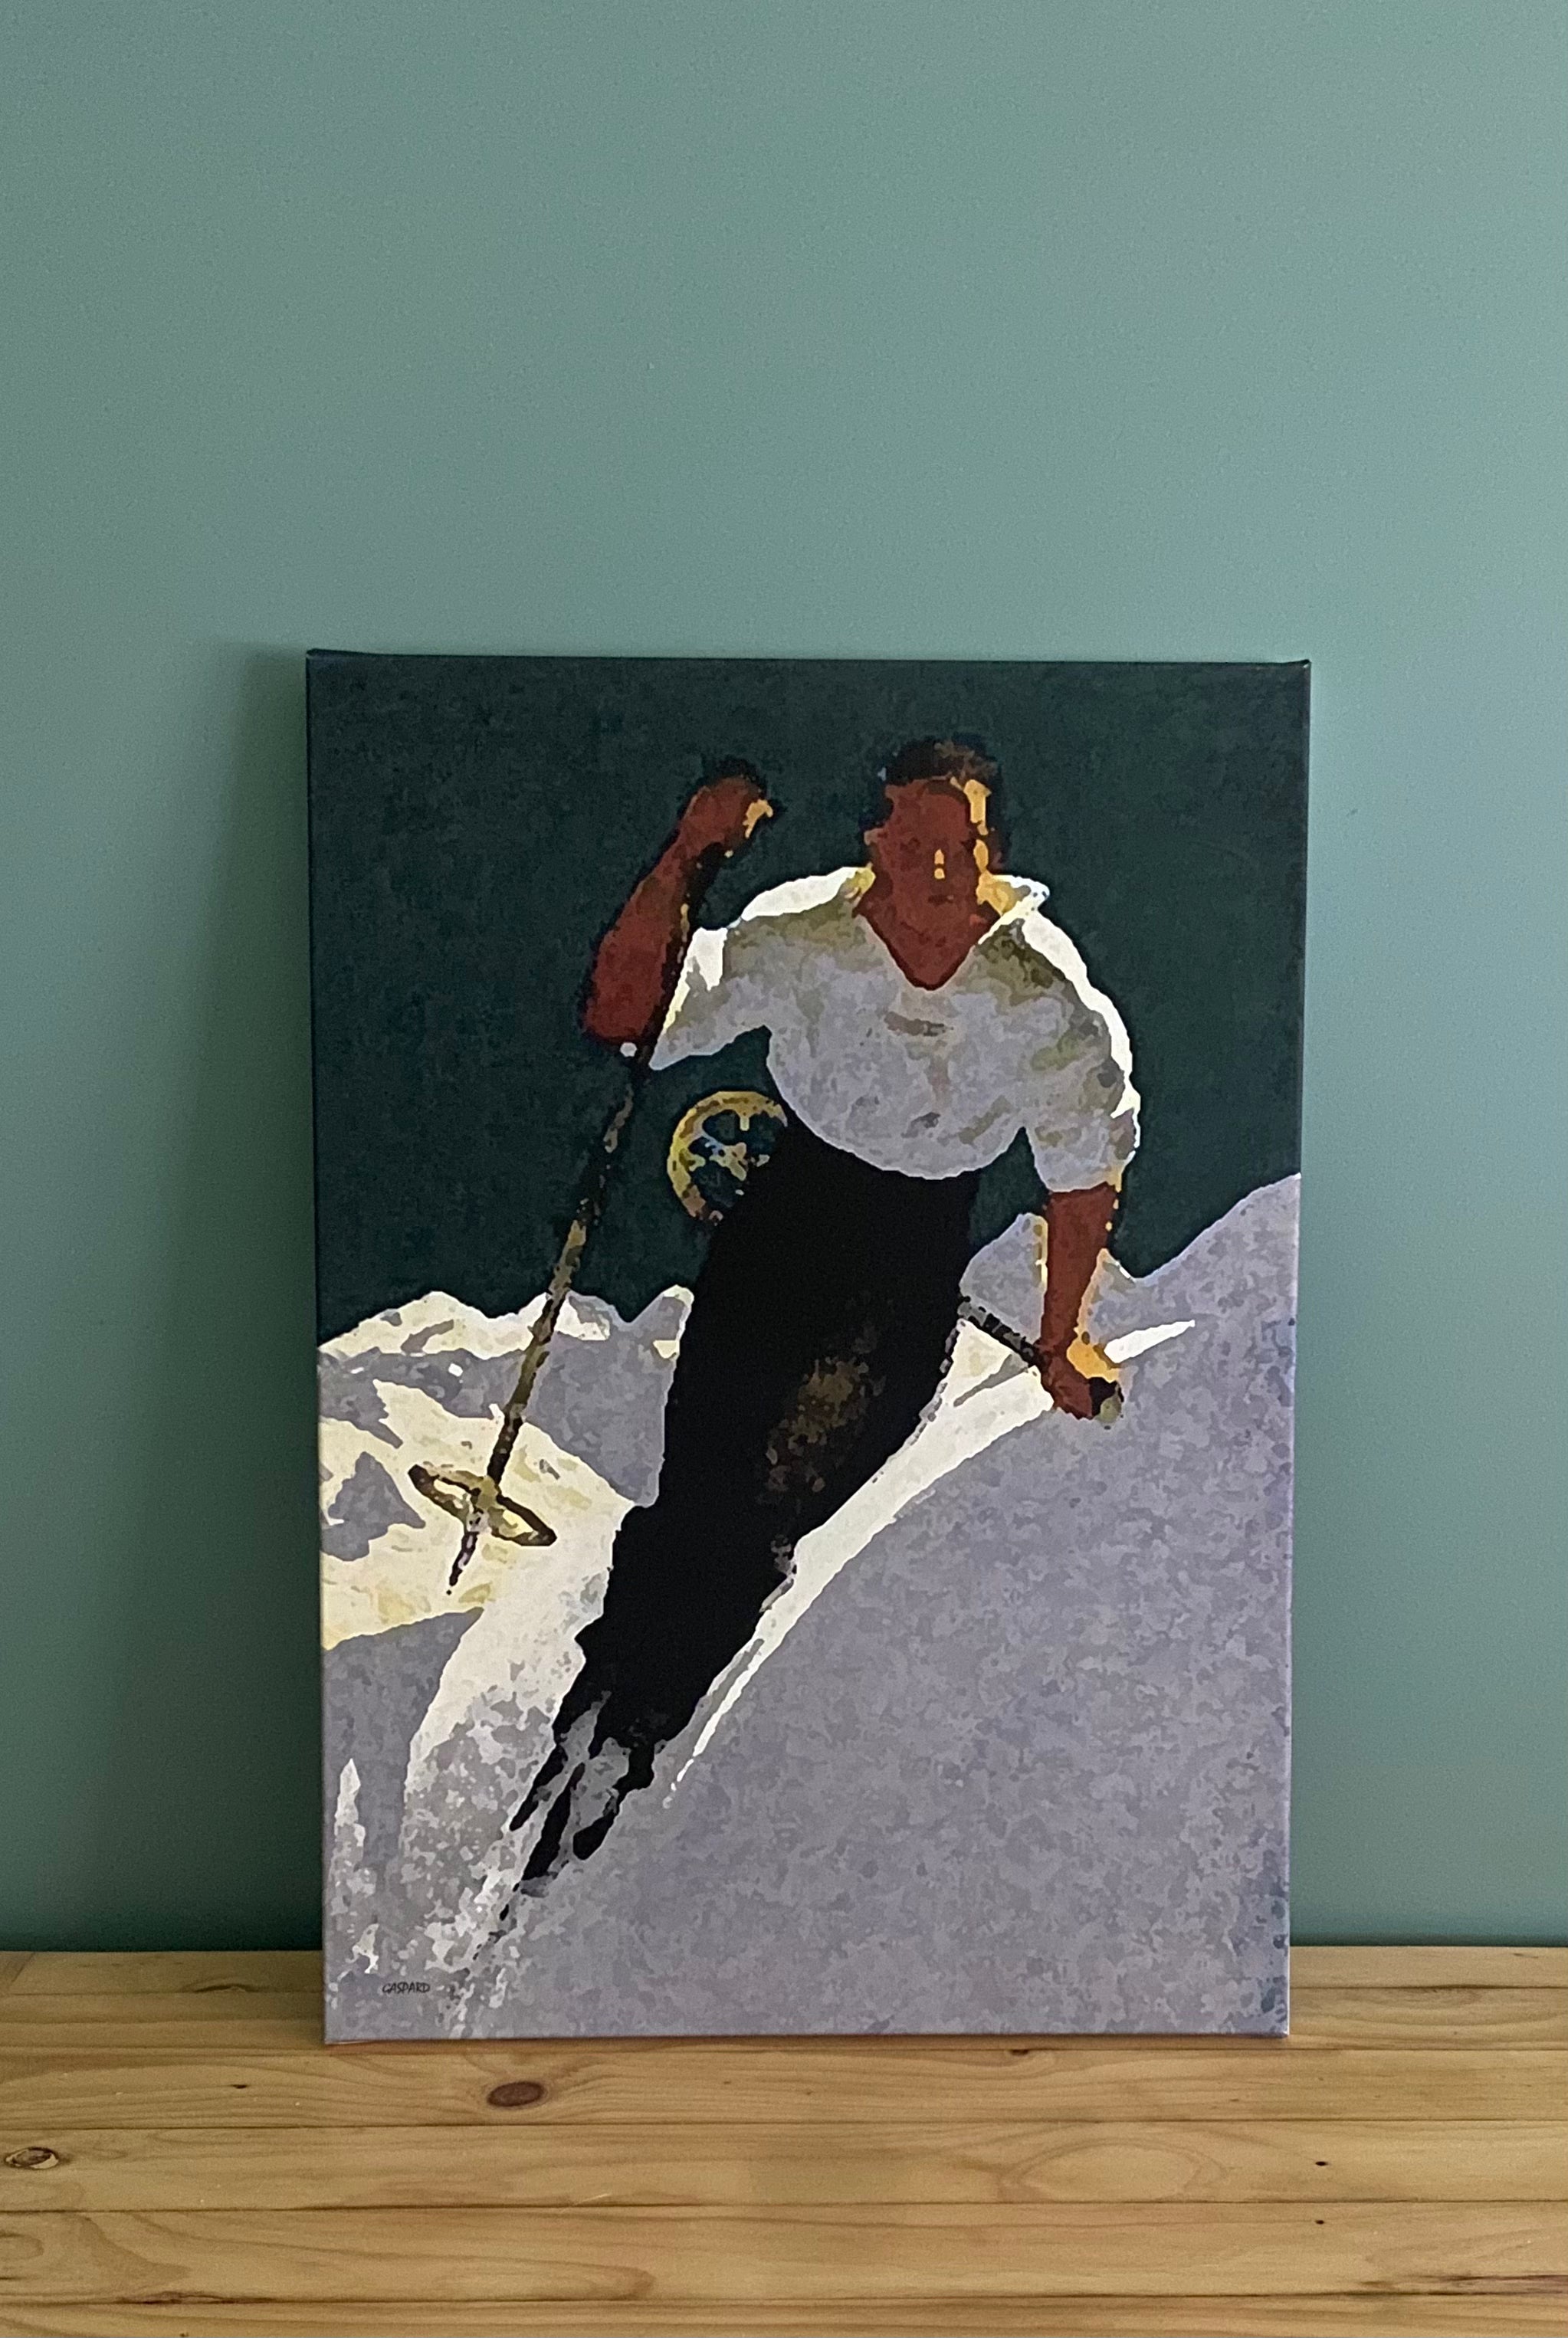 Canvas print of a man in a white shirt and blue pants skiing downhill, leaning left into the hill with mountains in the background below a dark green-blue tinged sky. Resting against a green wall on a timber table